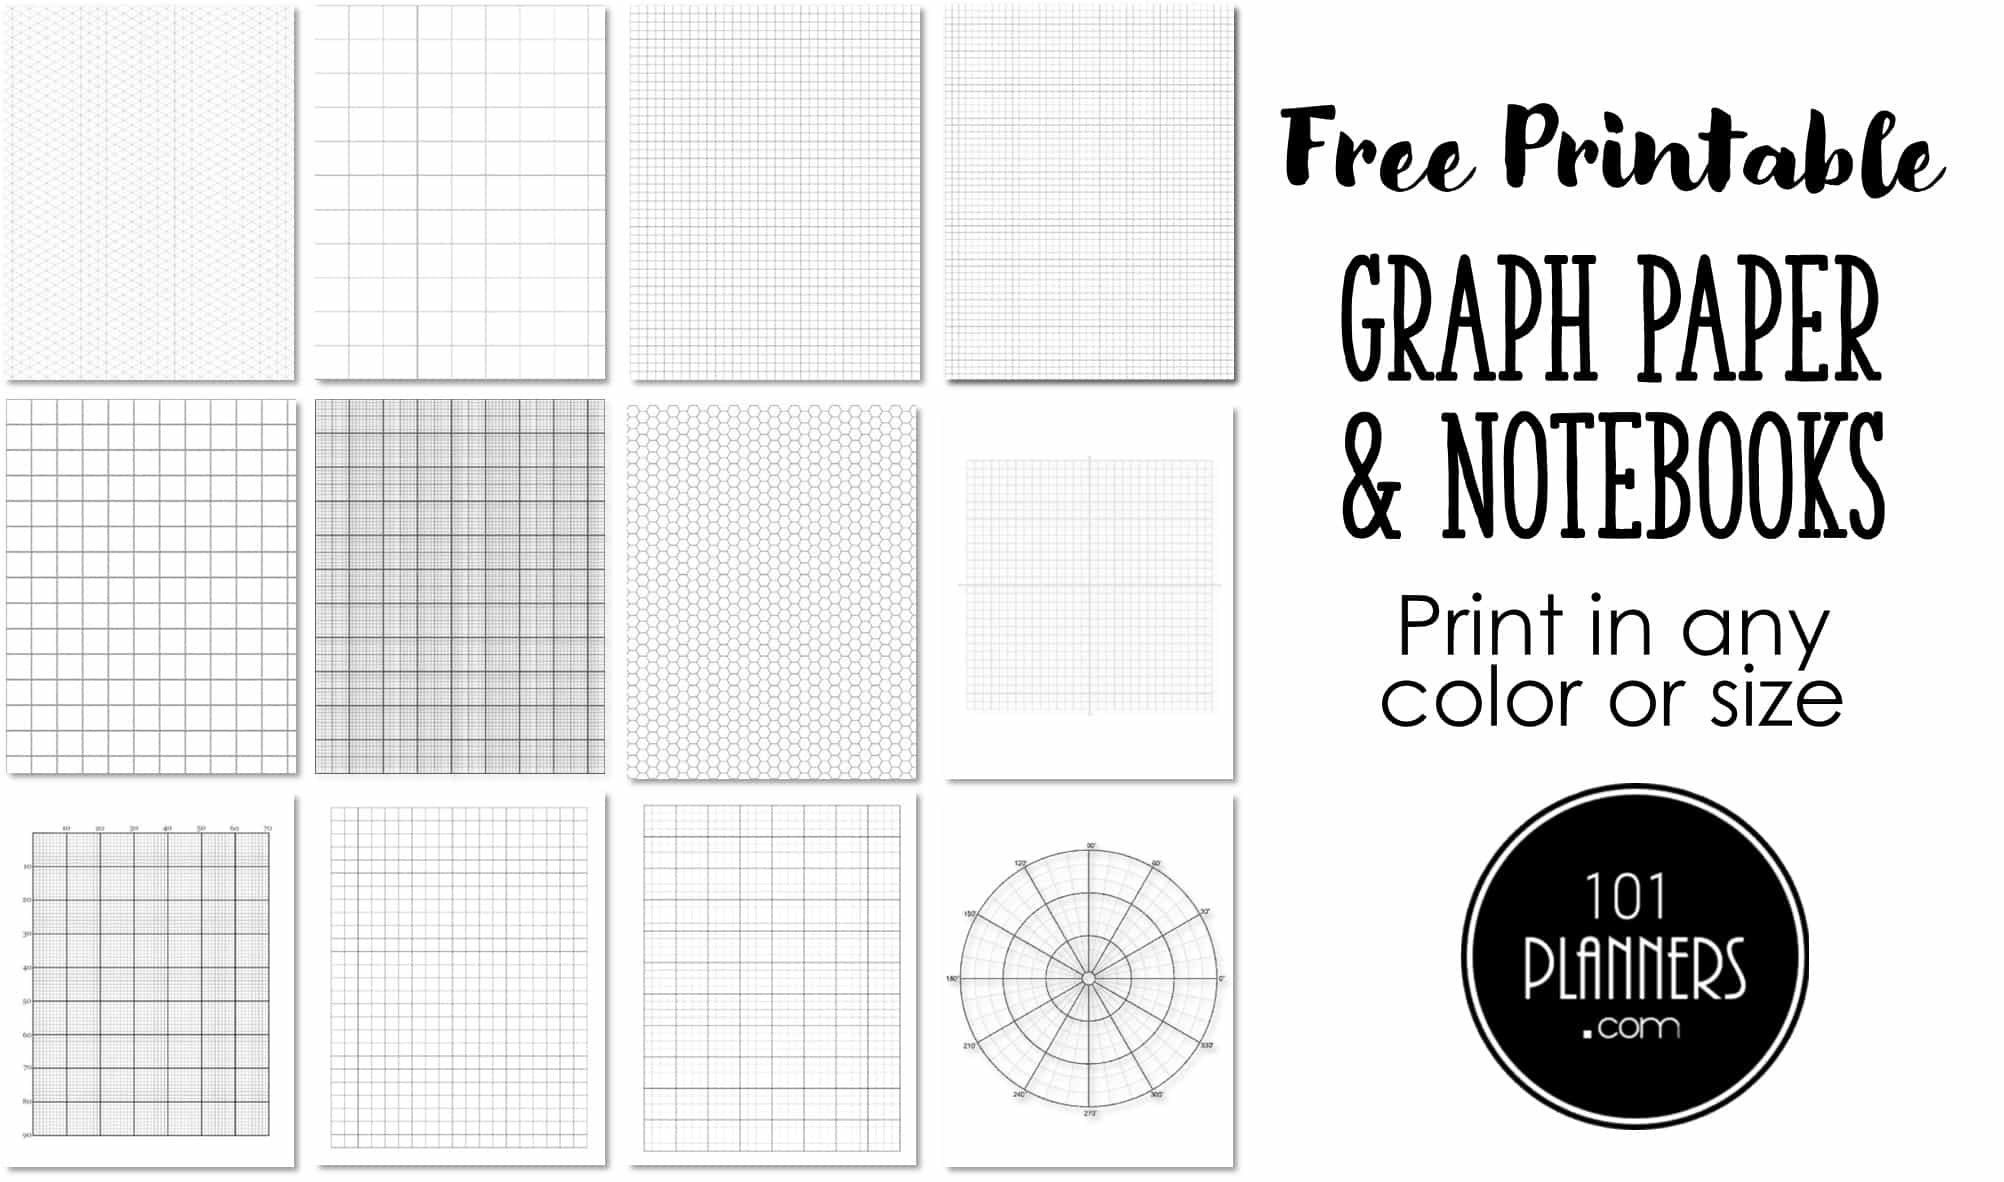 Sheets lined paper with border from Royalty Free Vector